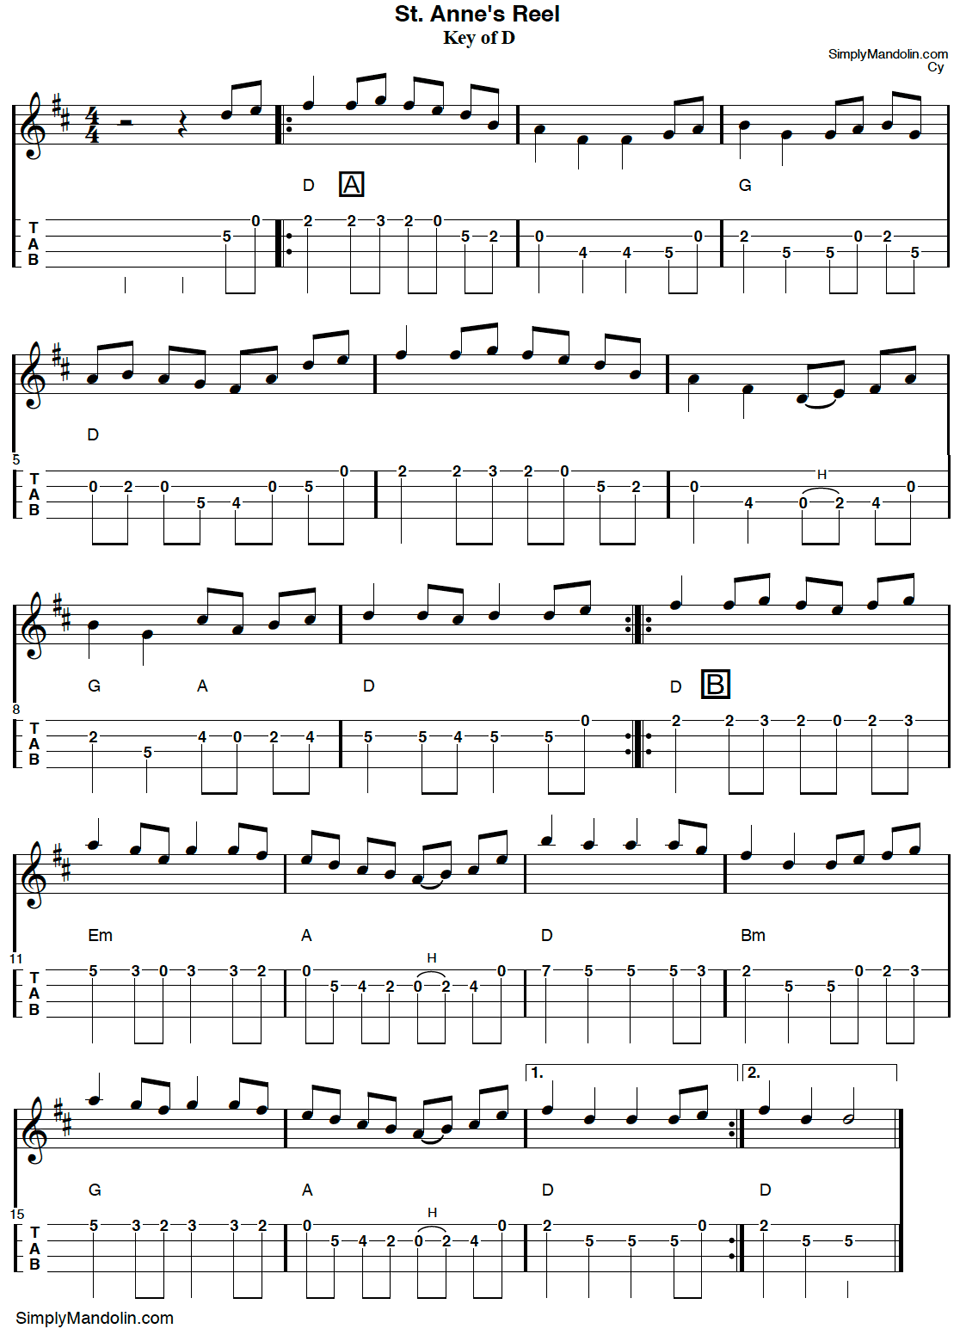 Image of music and tab for "St. Anne's Reel".